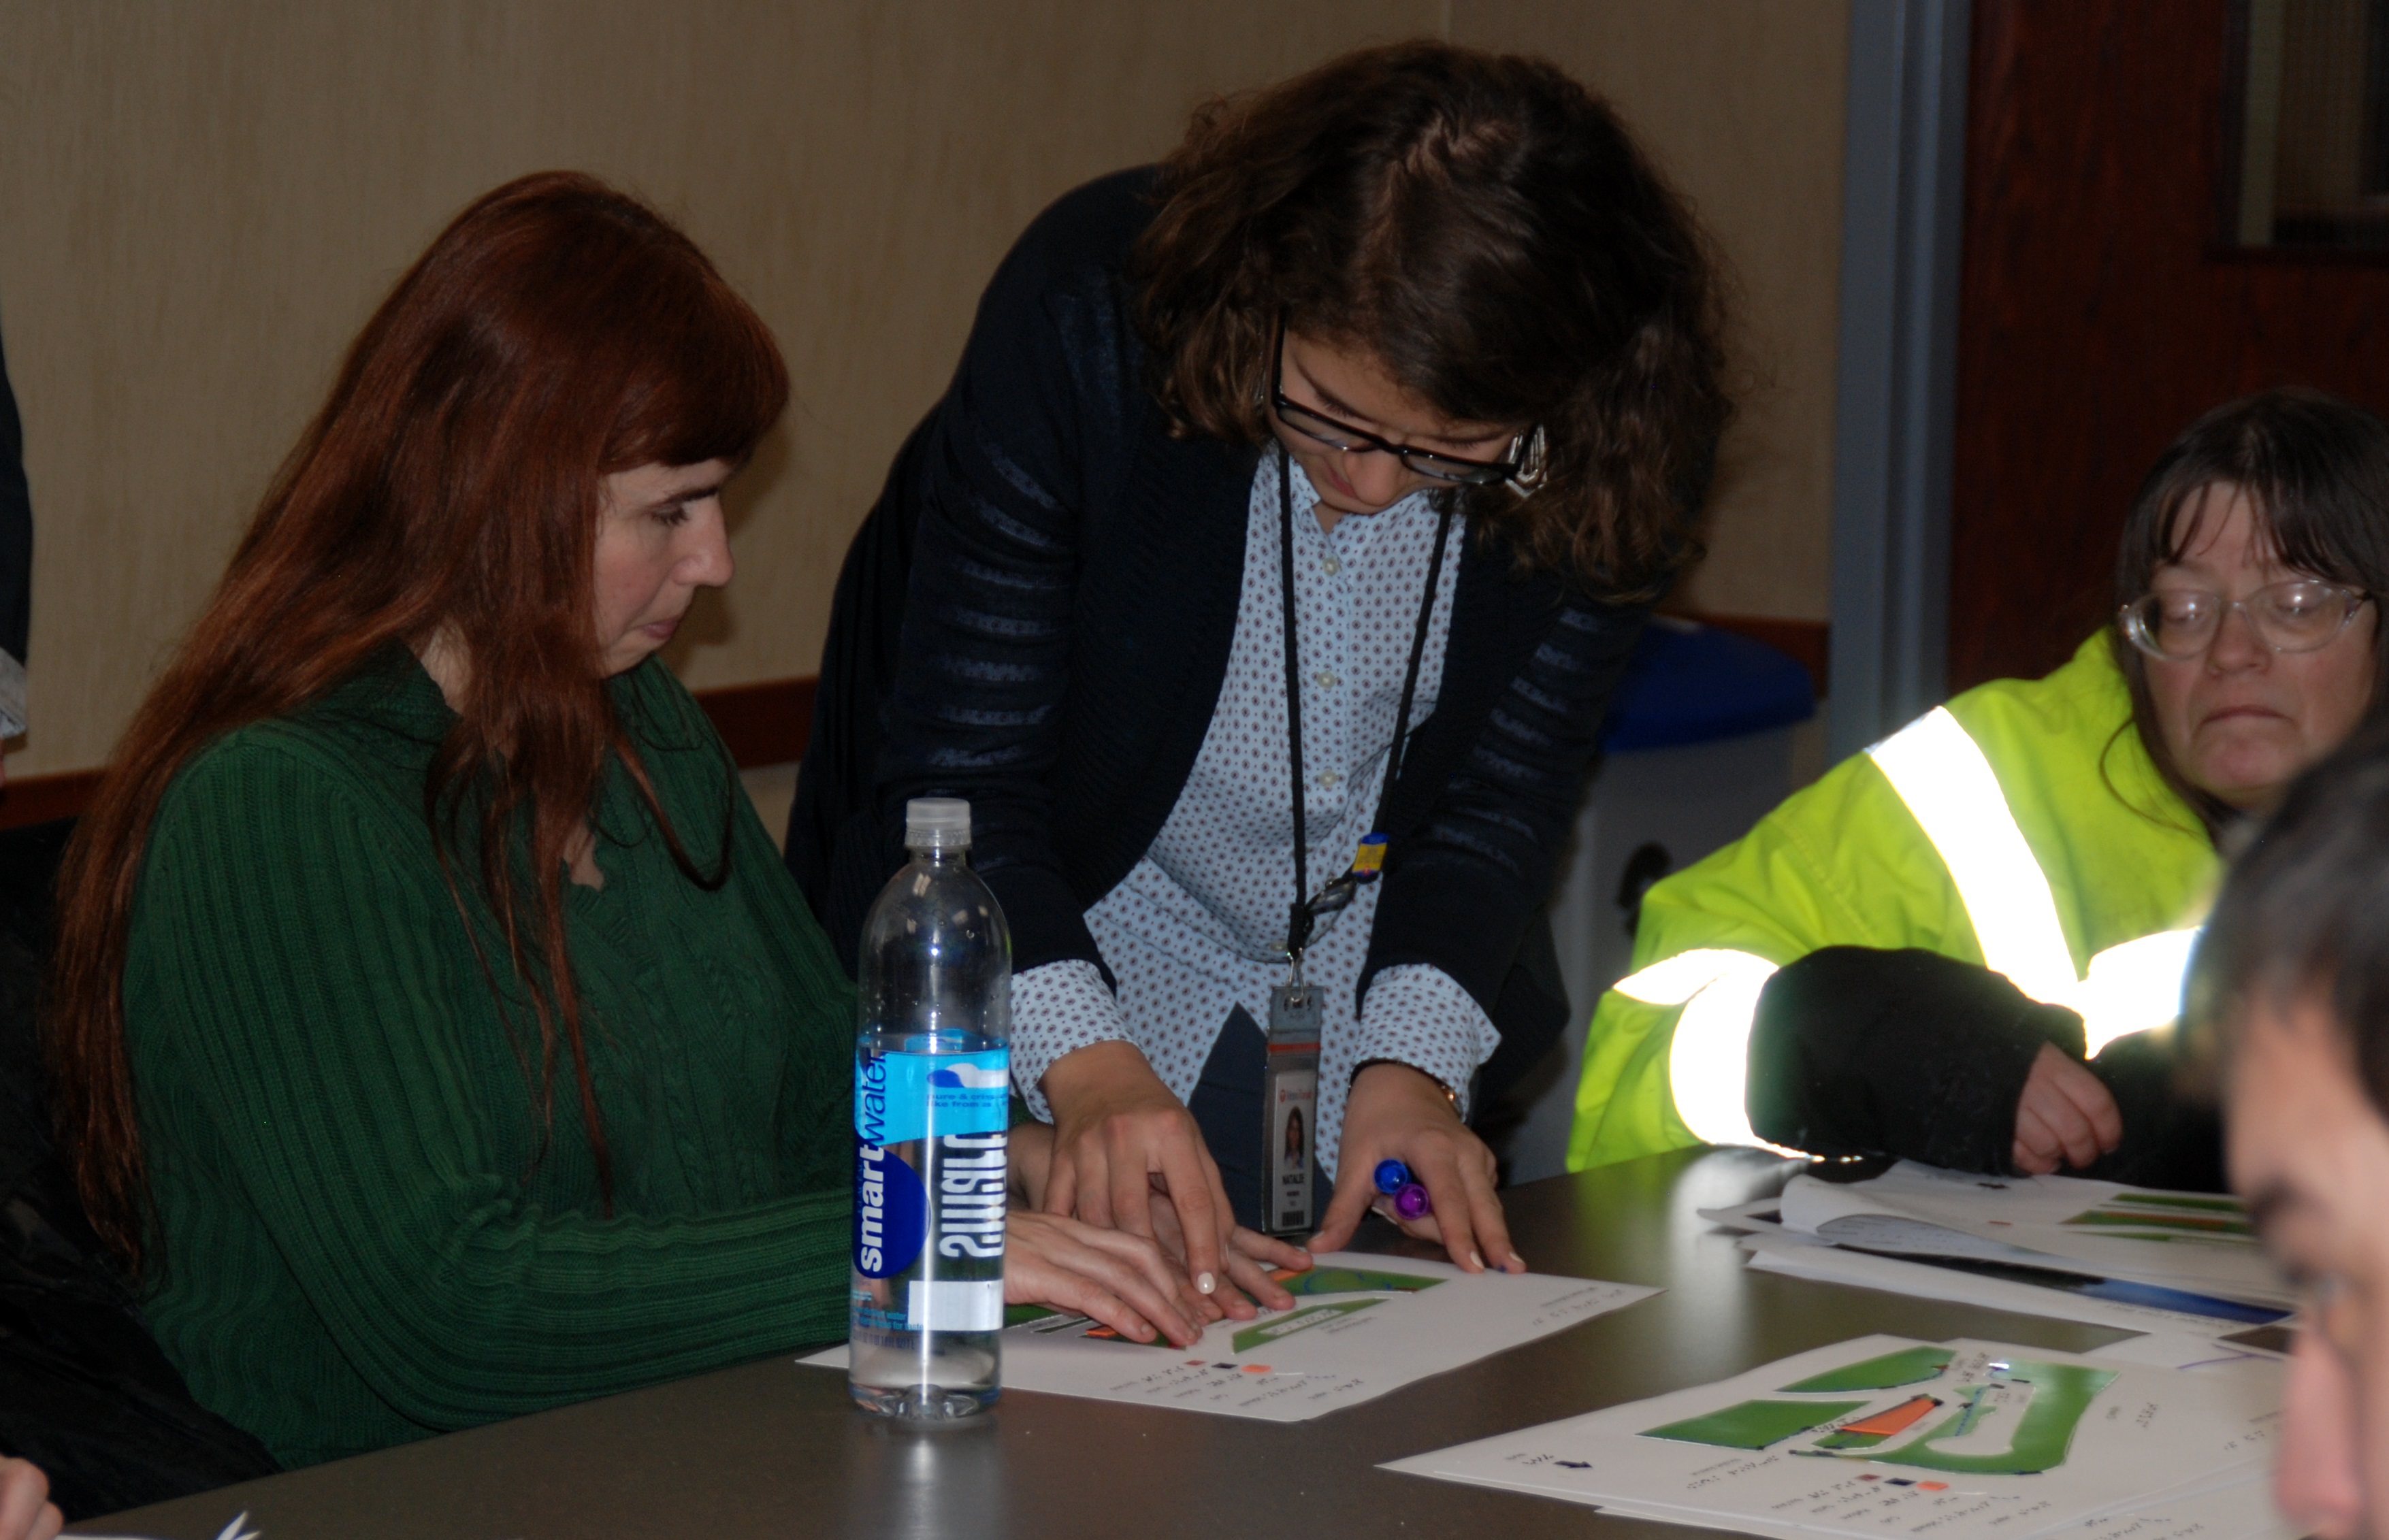 Associate Planner Natalie Westberg directs Transportation Accessibility Advisory Committee Sam Jasmine to station features on a layout printed in braille during a recent station design workshop.